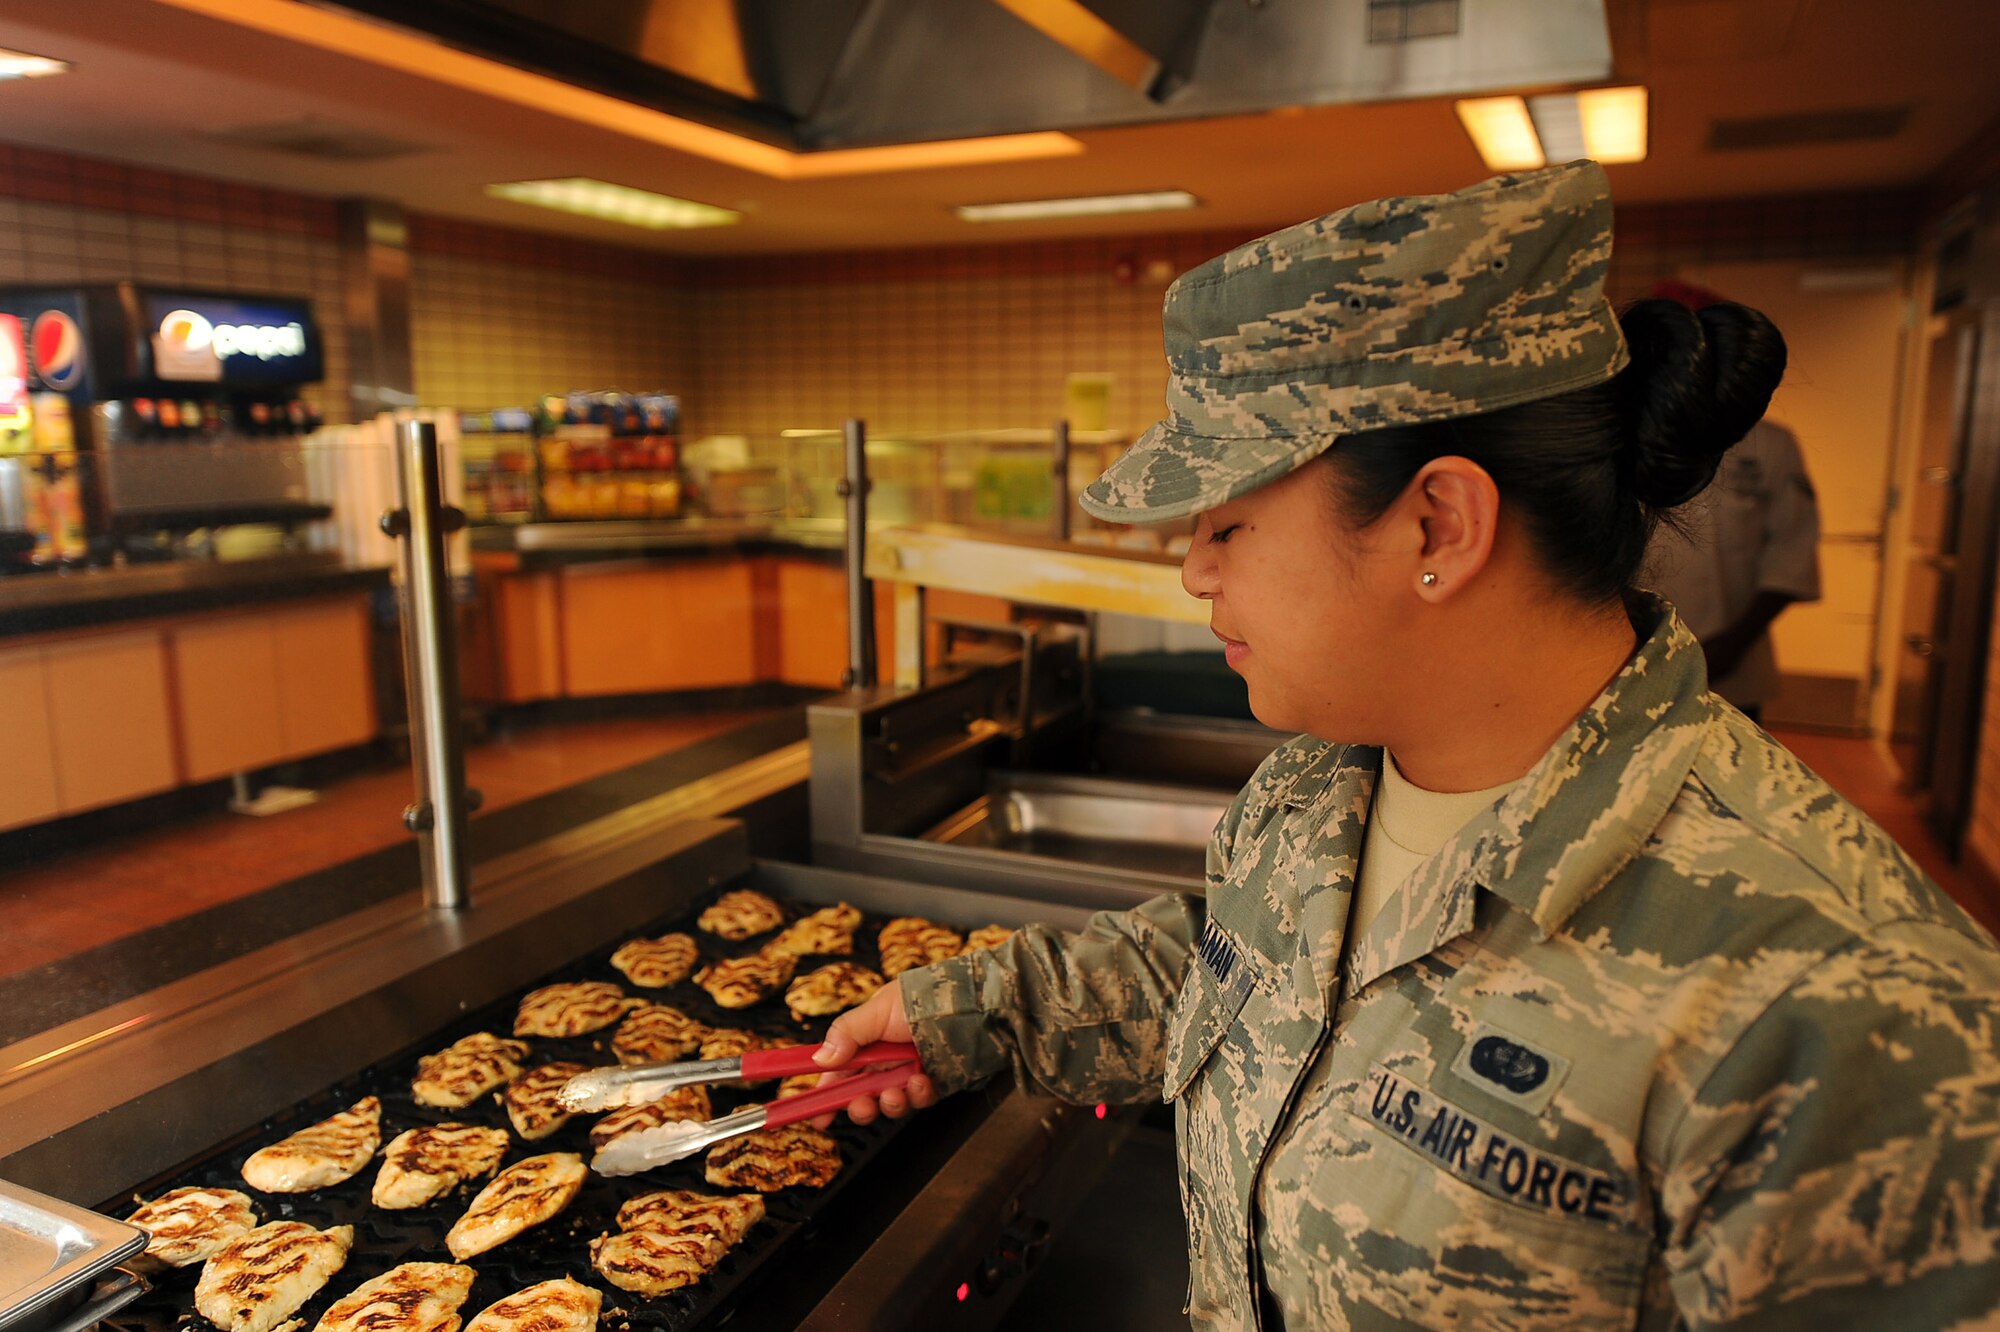 U.S. Air Force Staff Sgt. Jericha Lanaan, a services craftsman assigned to the 254th Force Support Squadron, Guam Air National Guard, grills chicken in preparation for the lunch rush at the Two Seasons dining facility, Aug. 9, 2017, during RED FLAG-Alaska (RF-A) 17-3, on Eielson Air Force Base, Alaska. This is Lanaan’s third TDY to Eielson in support of RED FLAG-Alaska. (U.S. Air Force photo by Staff Sgt. Jerilyn Quintanilla)